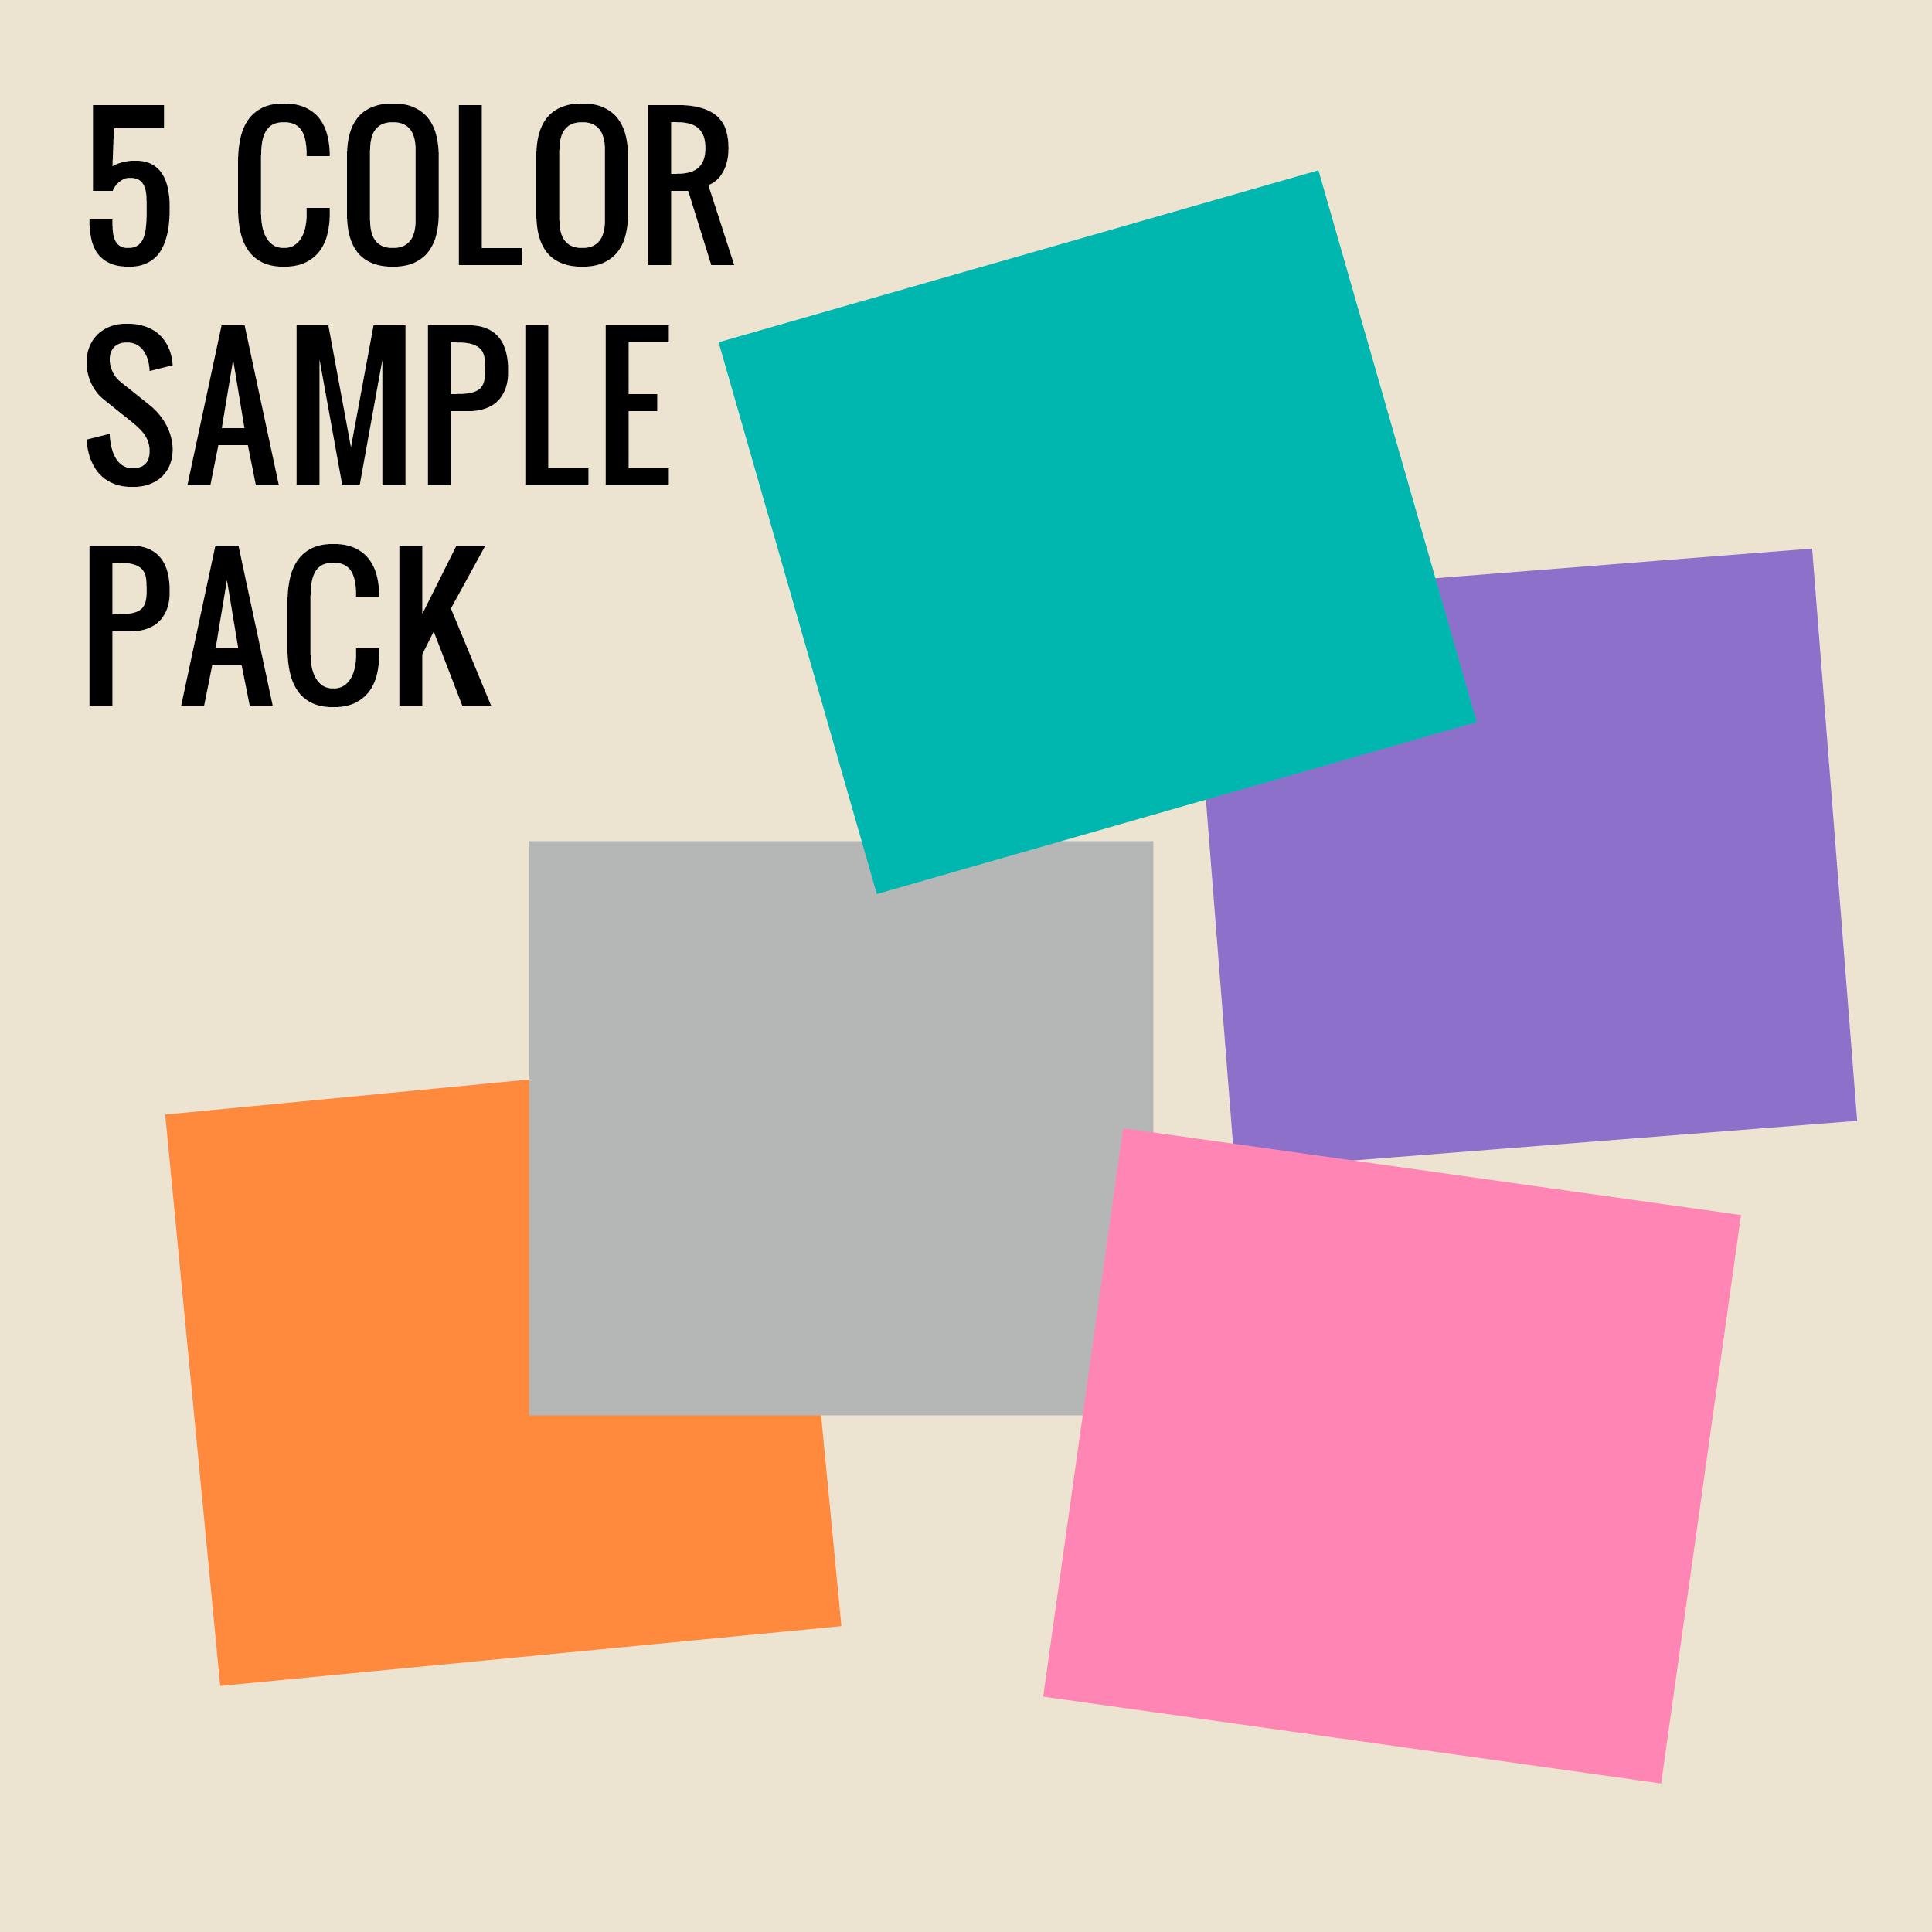 5 Color Sample Pack Wall Decal World